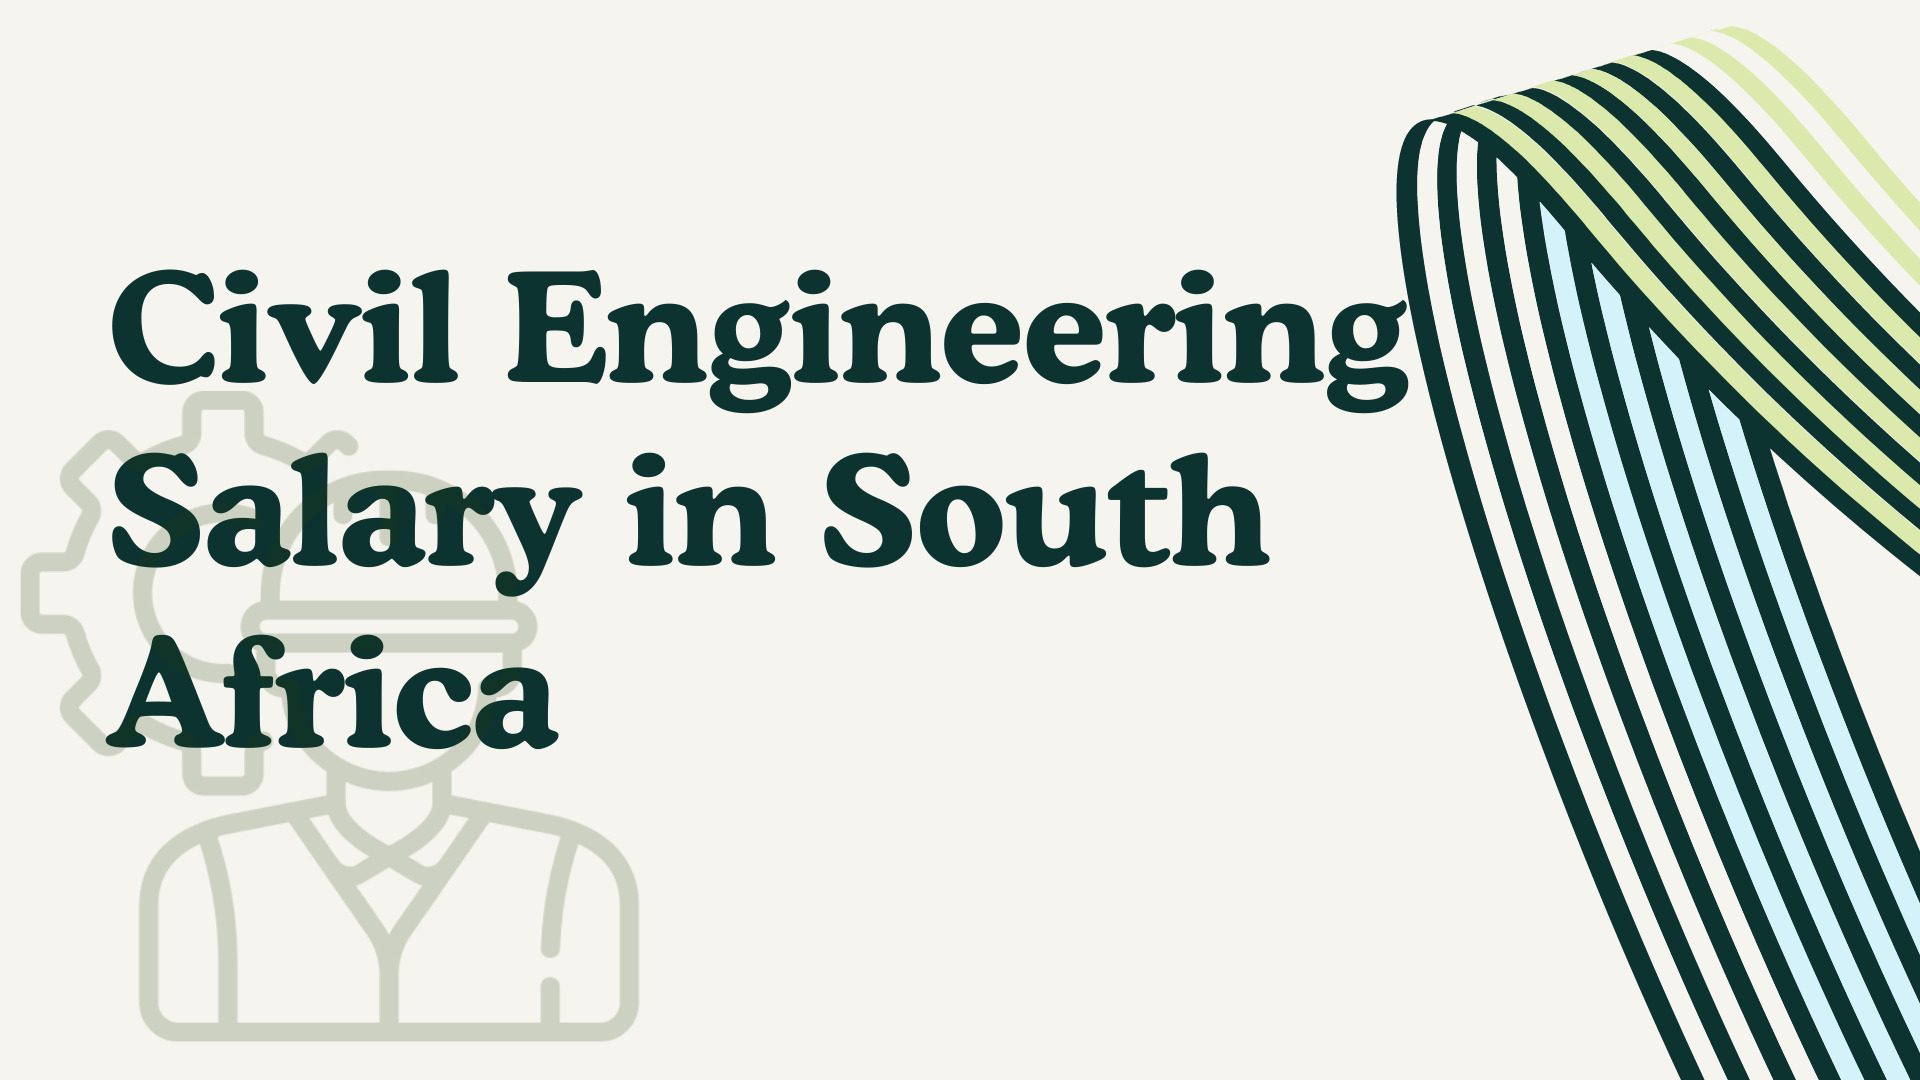 Civil Engineering Salary in South Africa